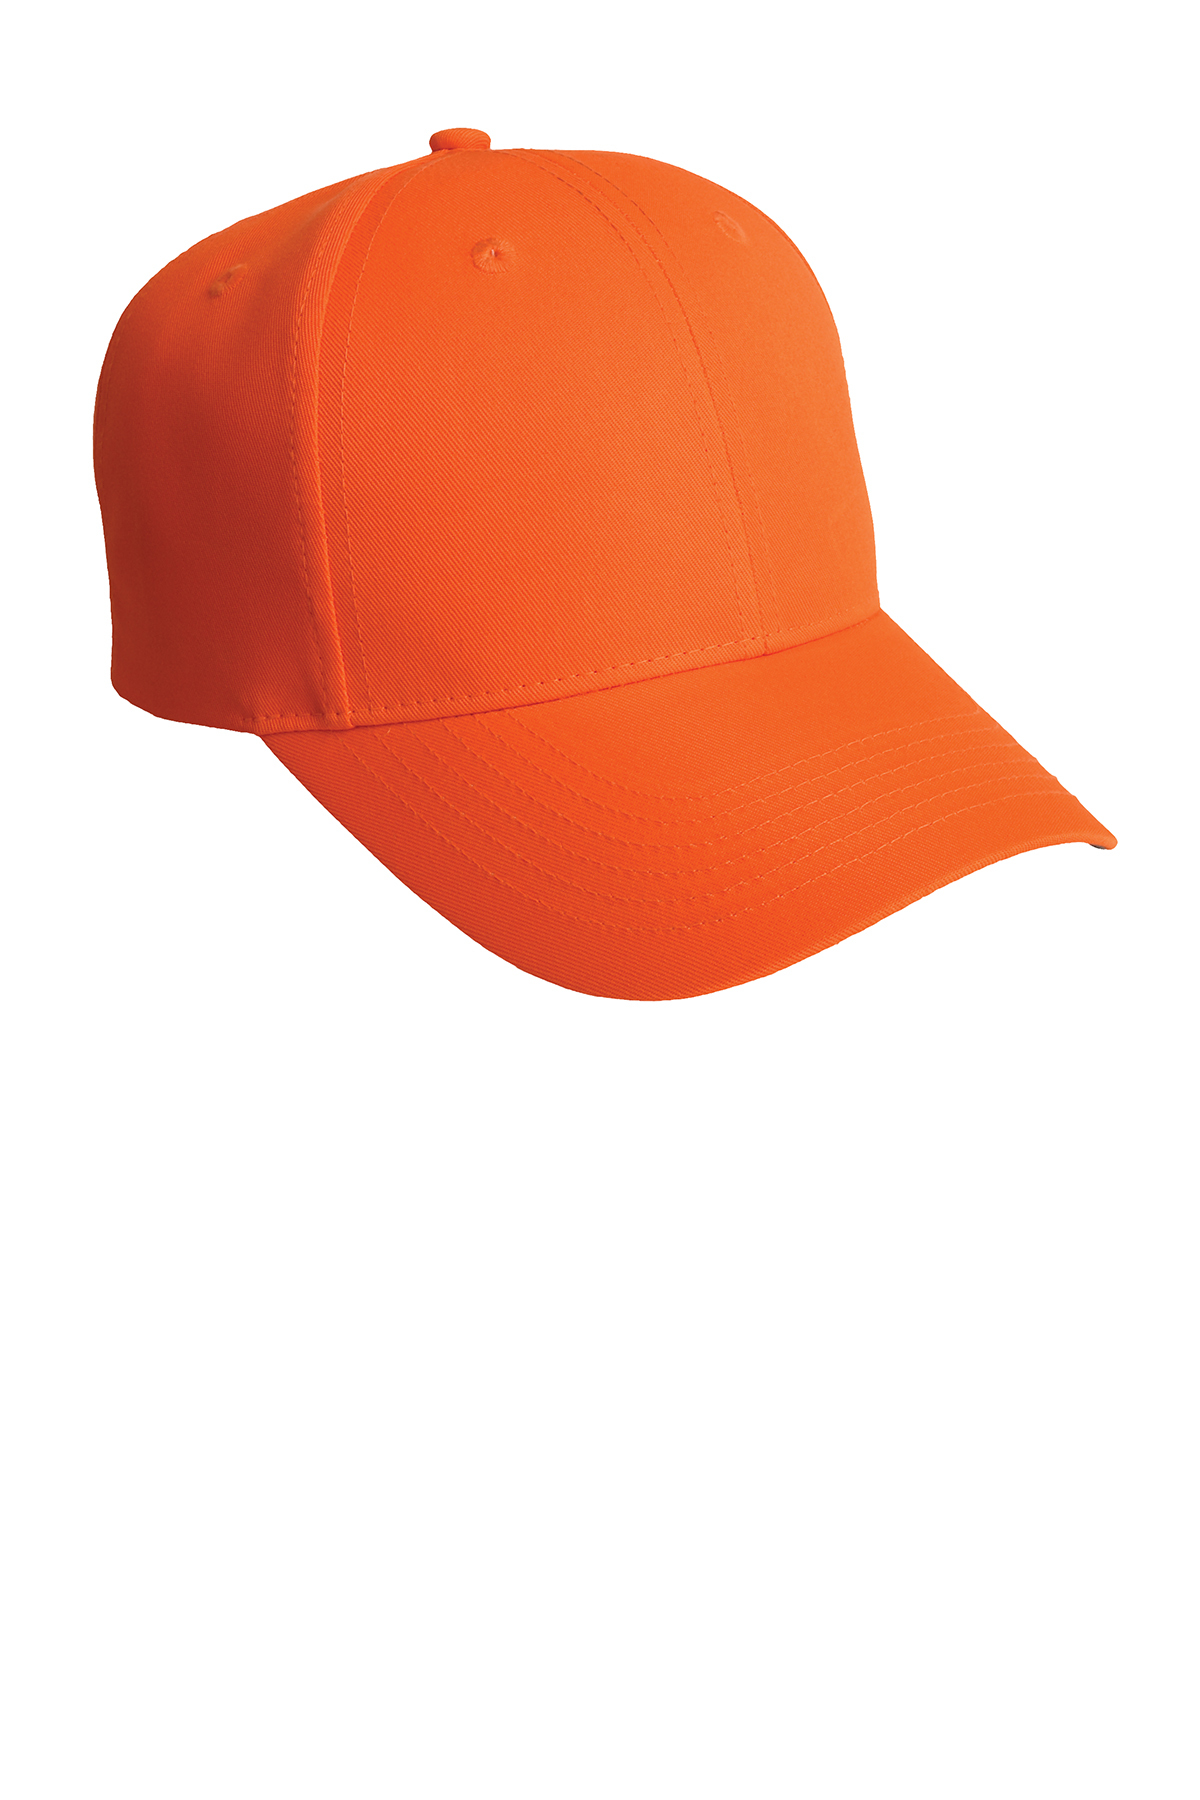 Port Authority Solid Enhanced Visibility Cap | Product | SanMar